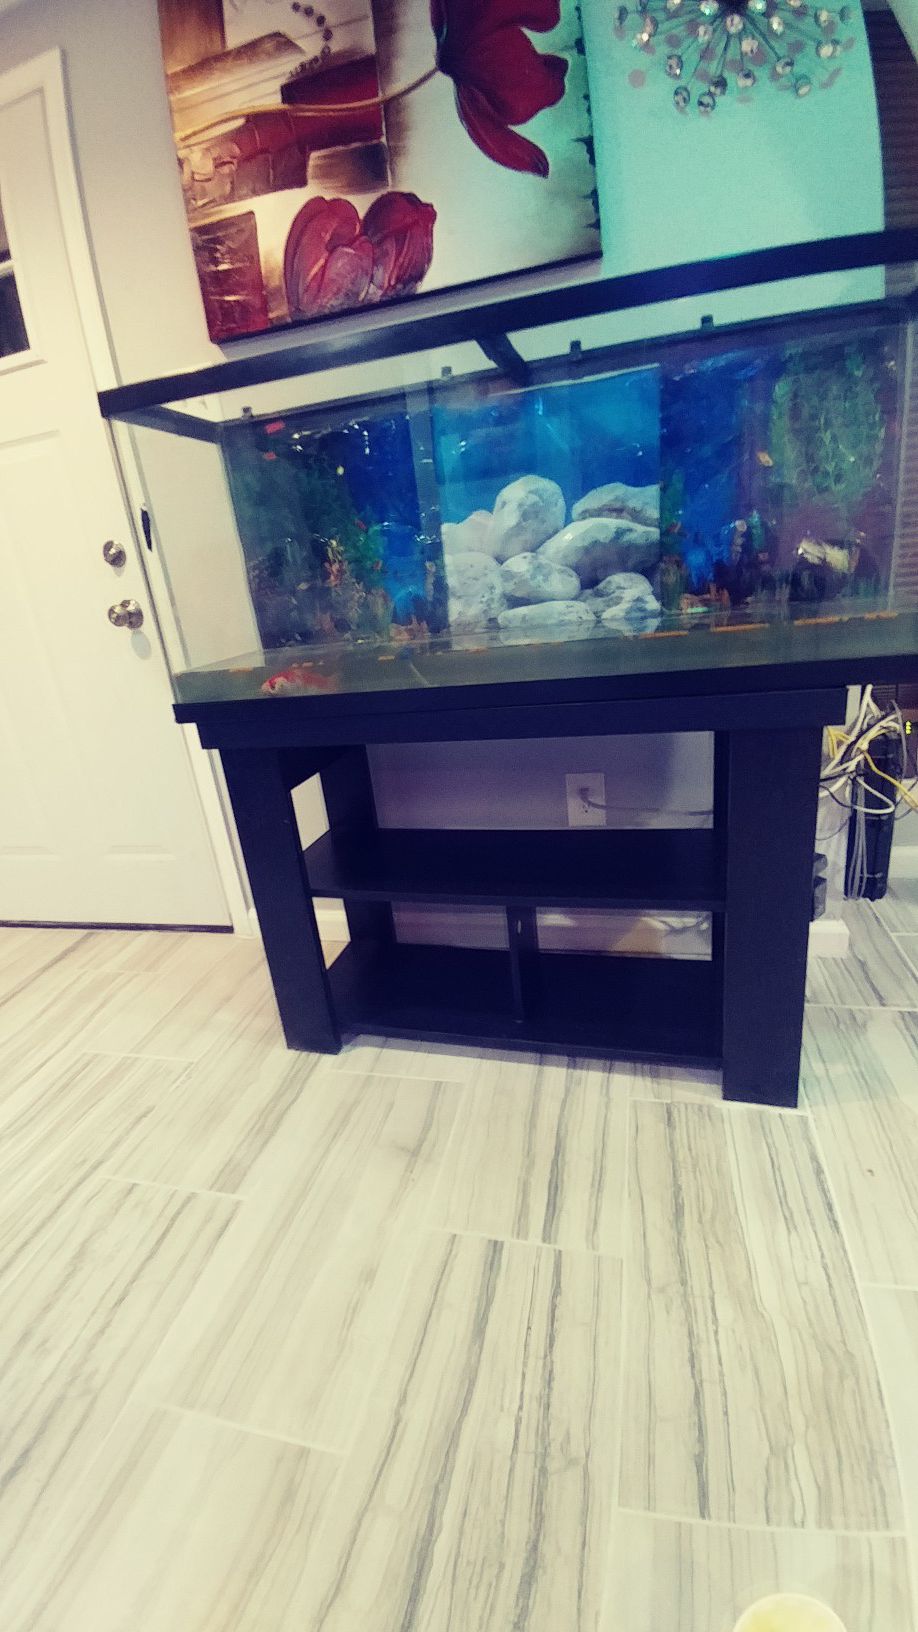 55 gallon aquarium with new filter, pack of carborn filter pads and free stand